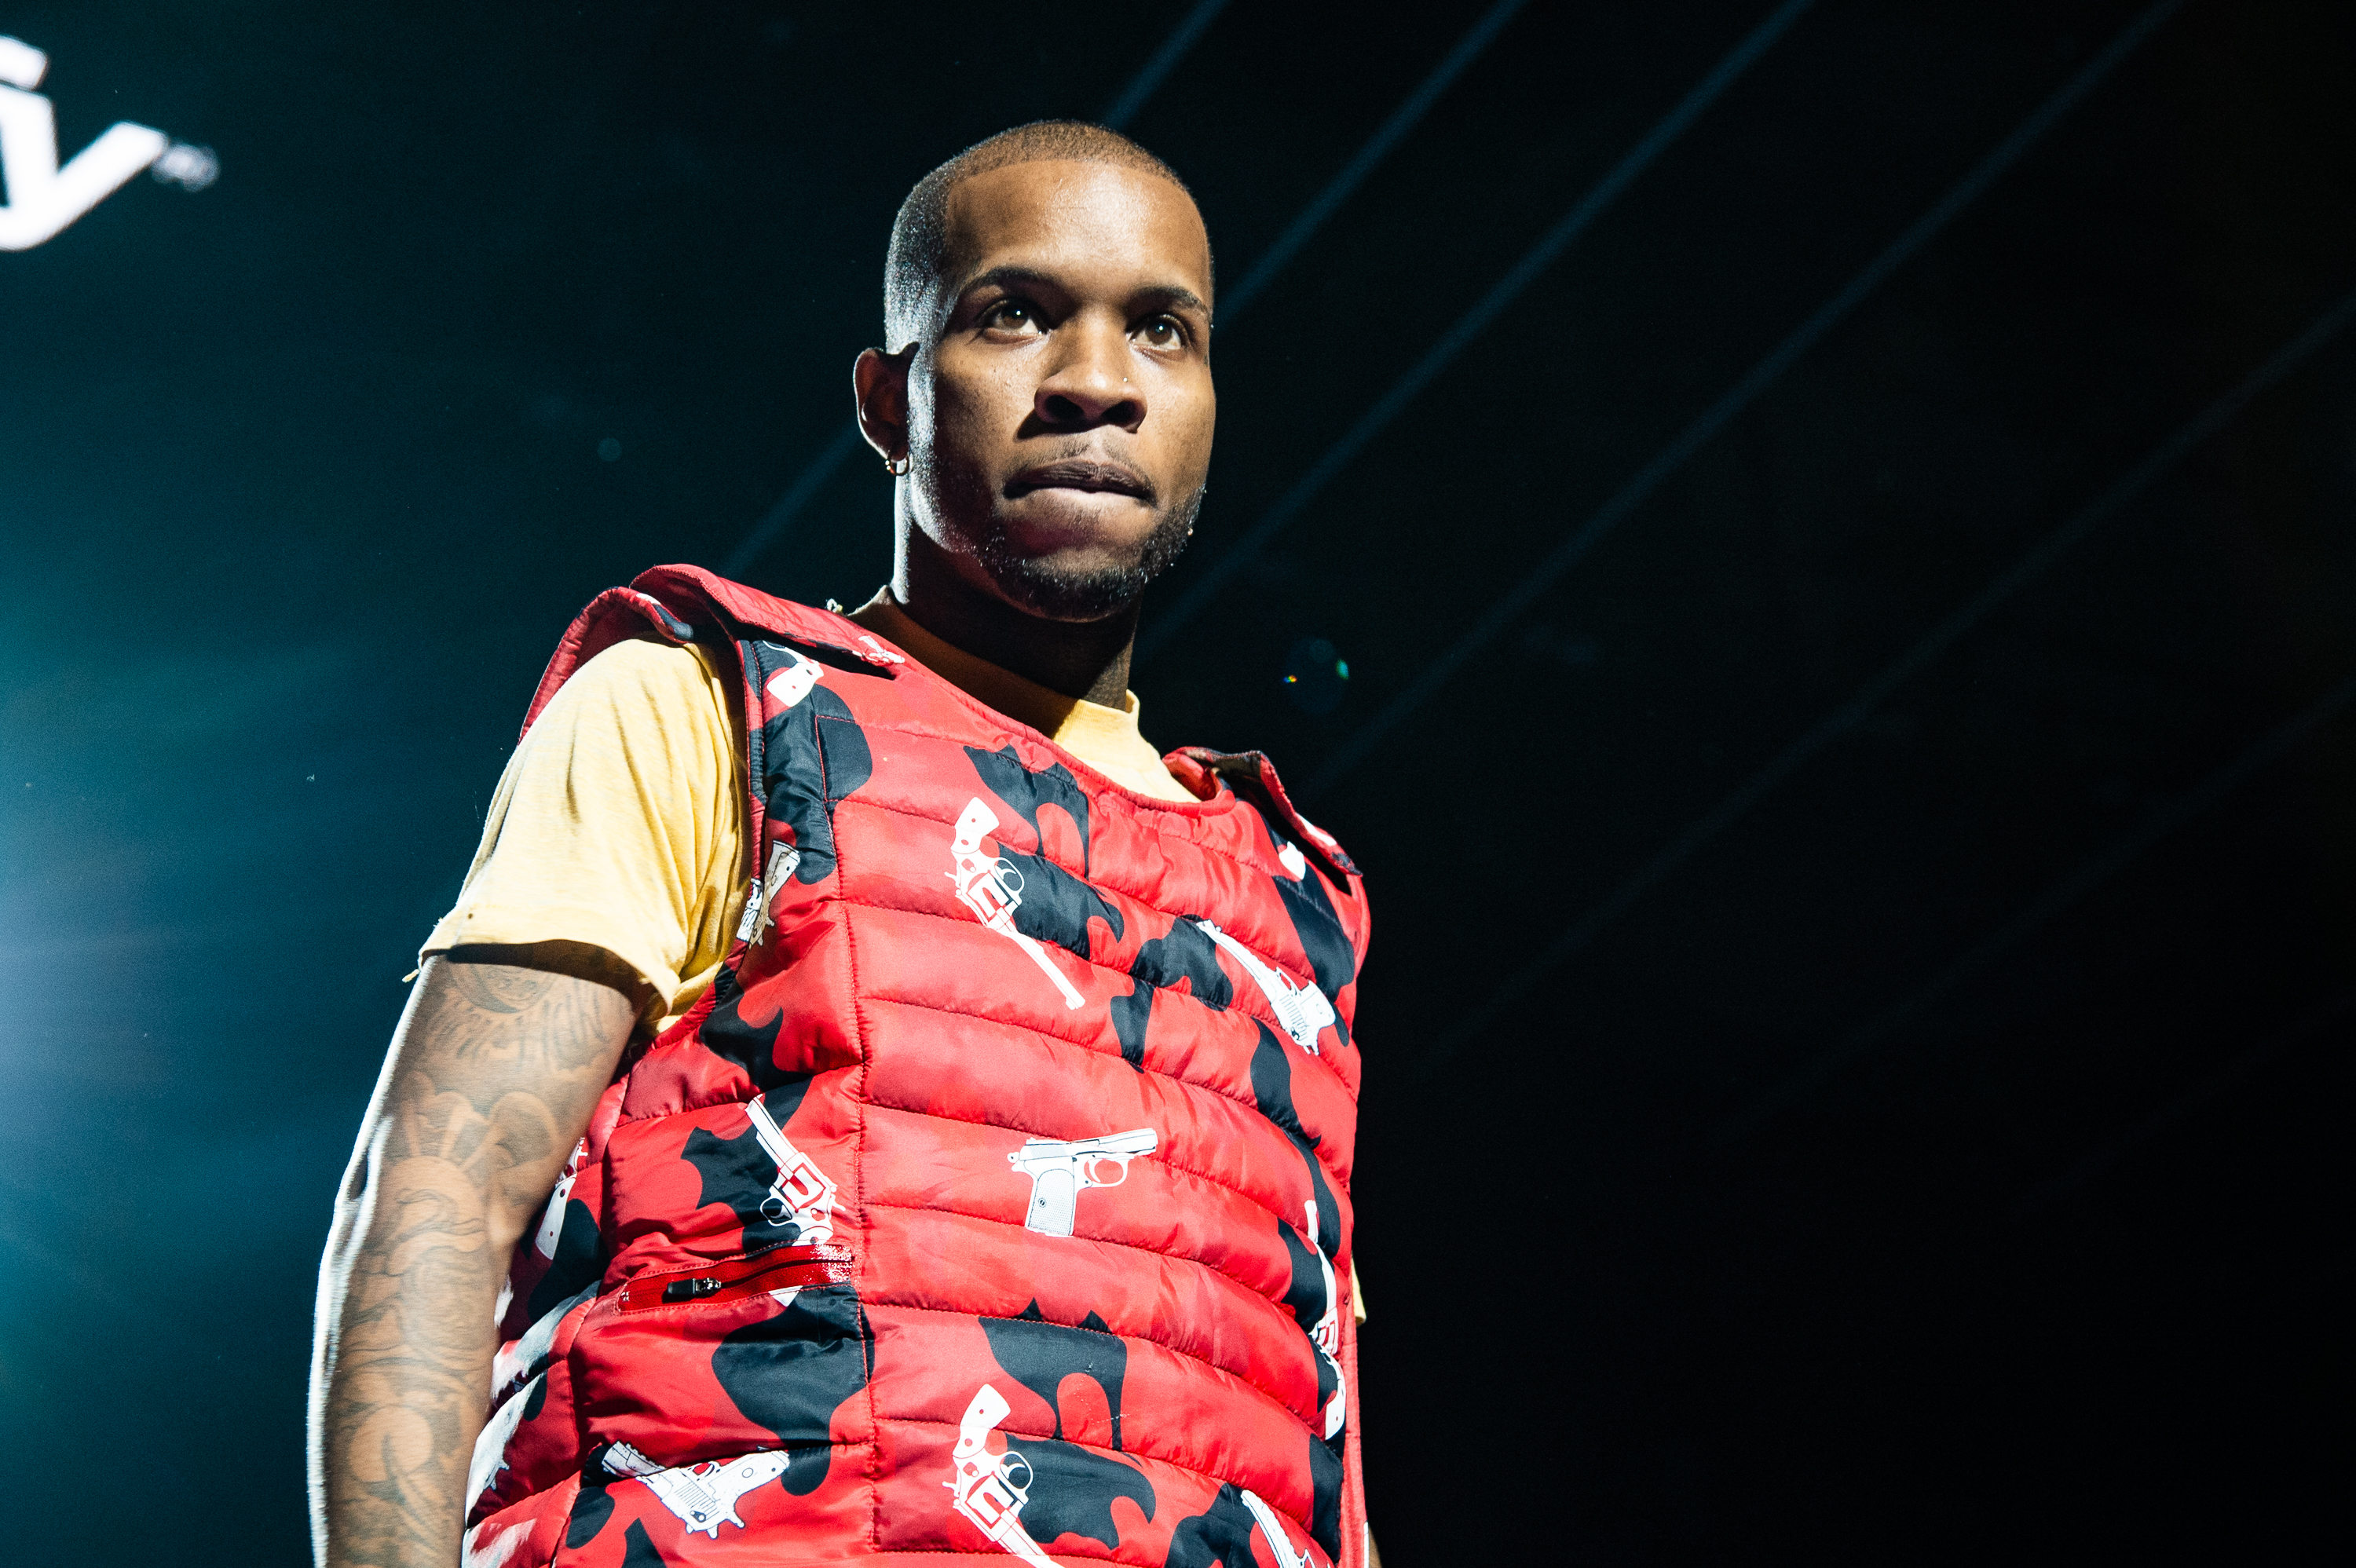 Tory Lanez Calls For A “Fair Trial” During New Phone Call From Prison